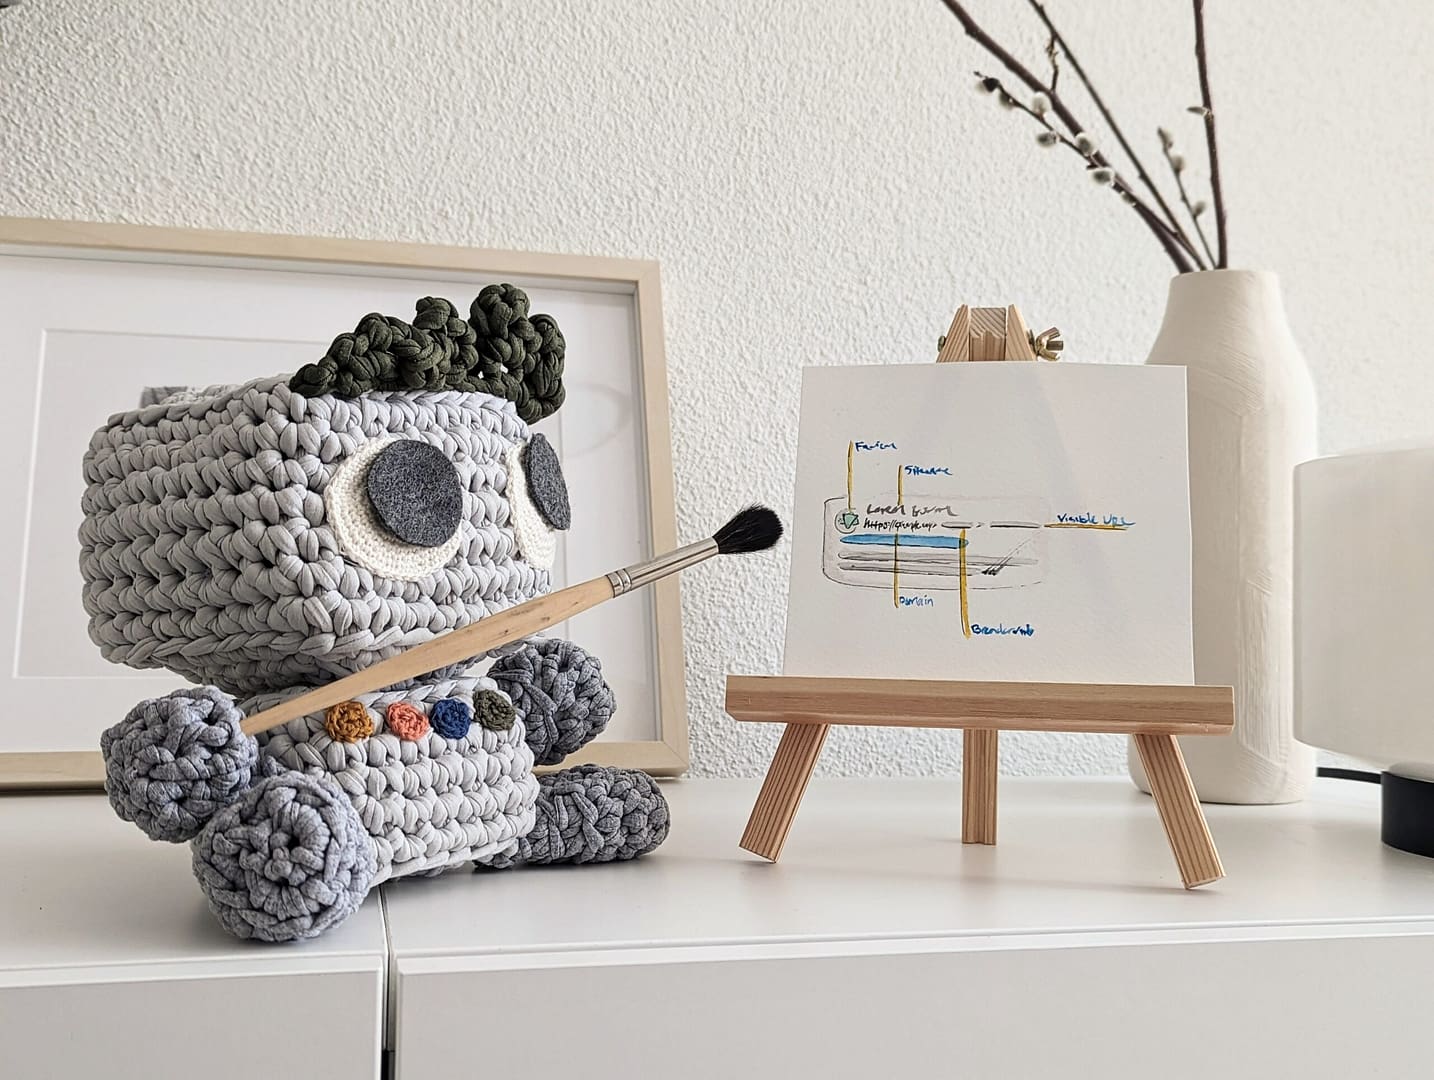 Adorable knitted stuffed toy artist, holding a paintbrush and enthusiastically pointing it at a piece of paper covered in creative plans and designs.